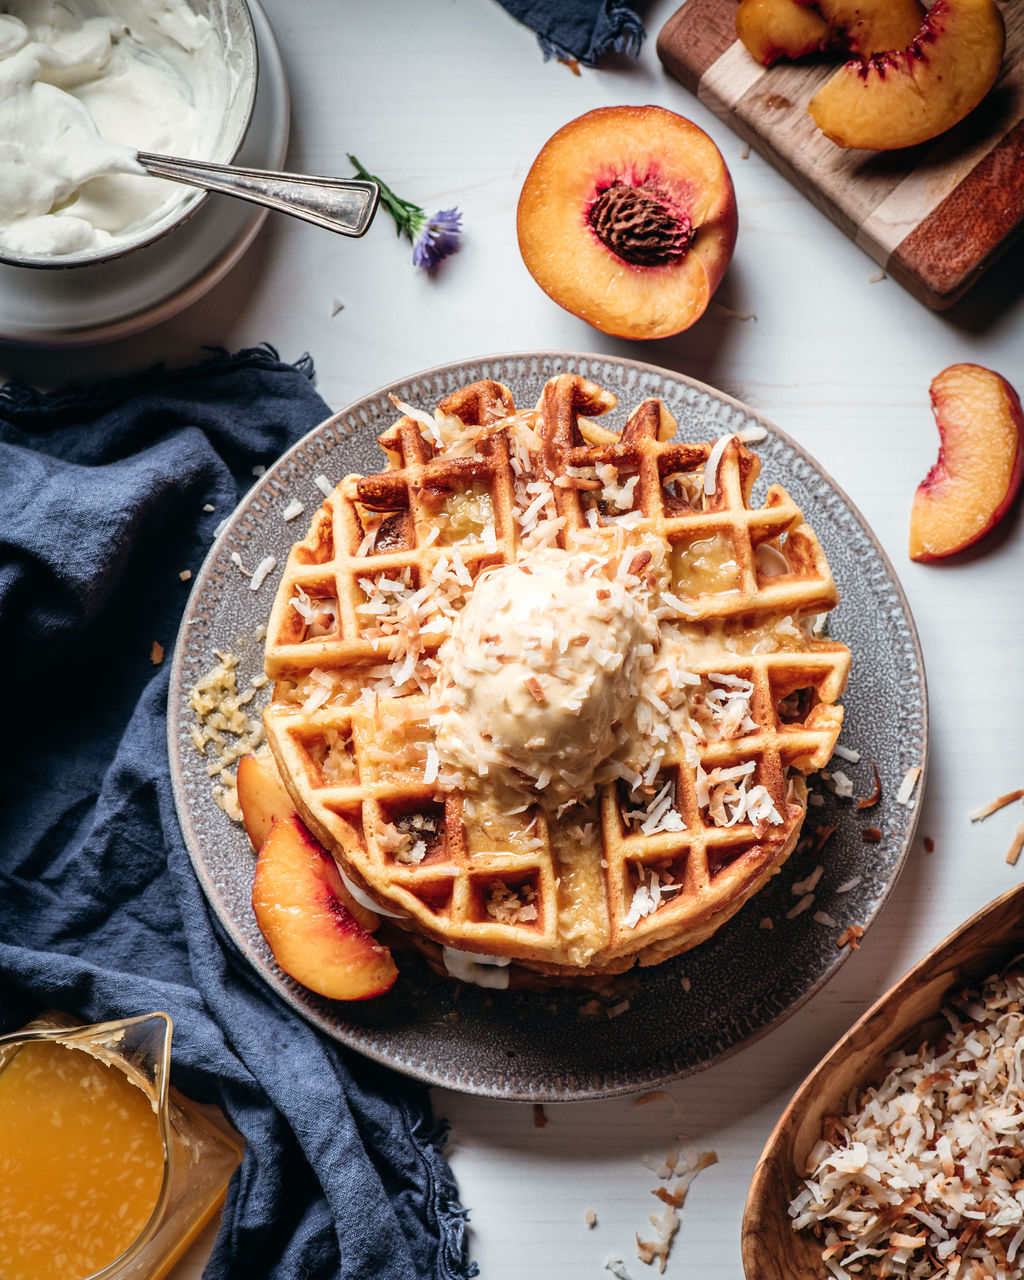 Passion Fruit and Peach Waffles on a table with a blue napkin